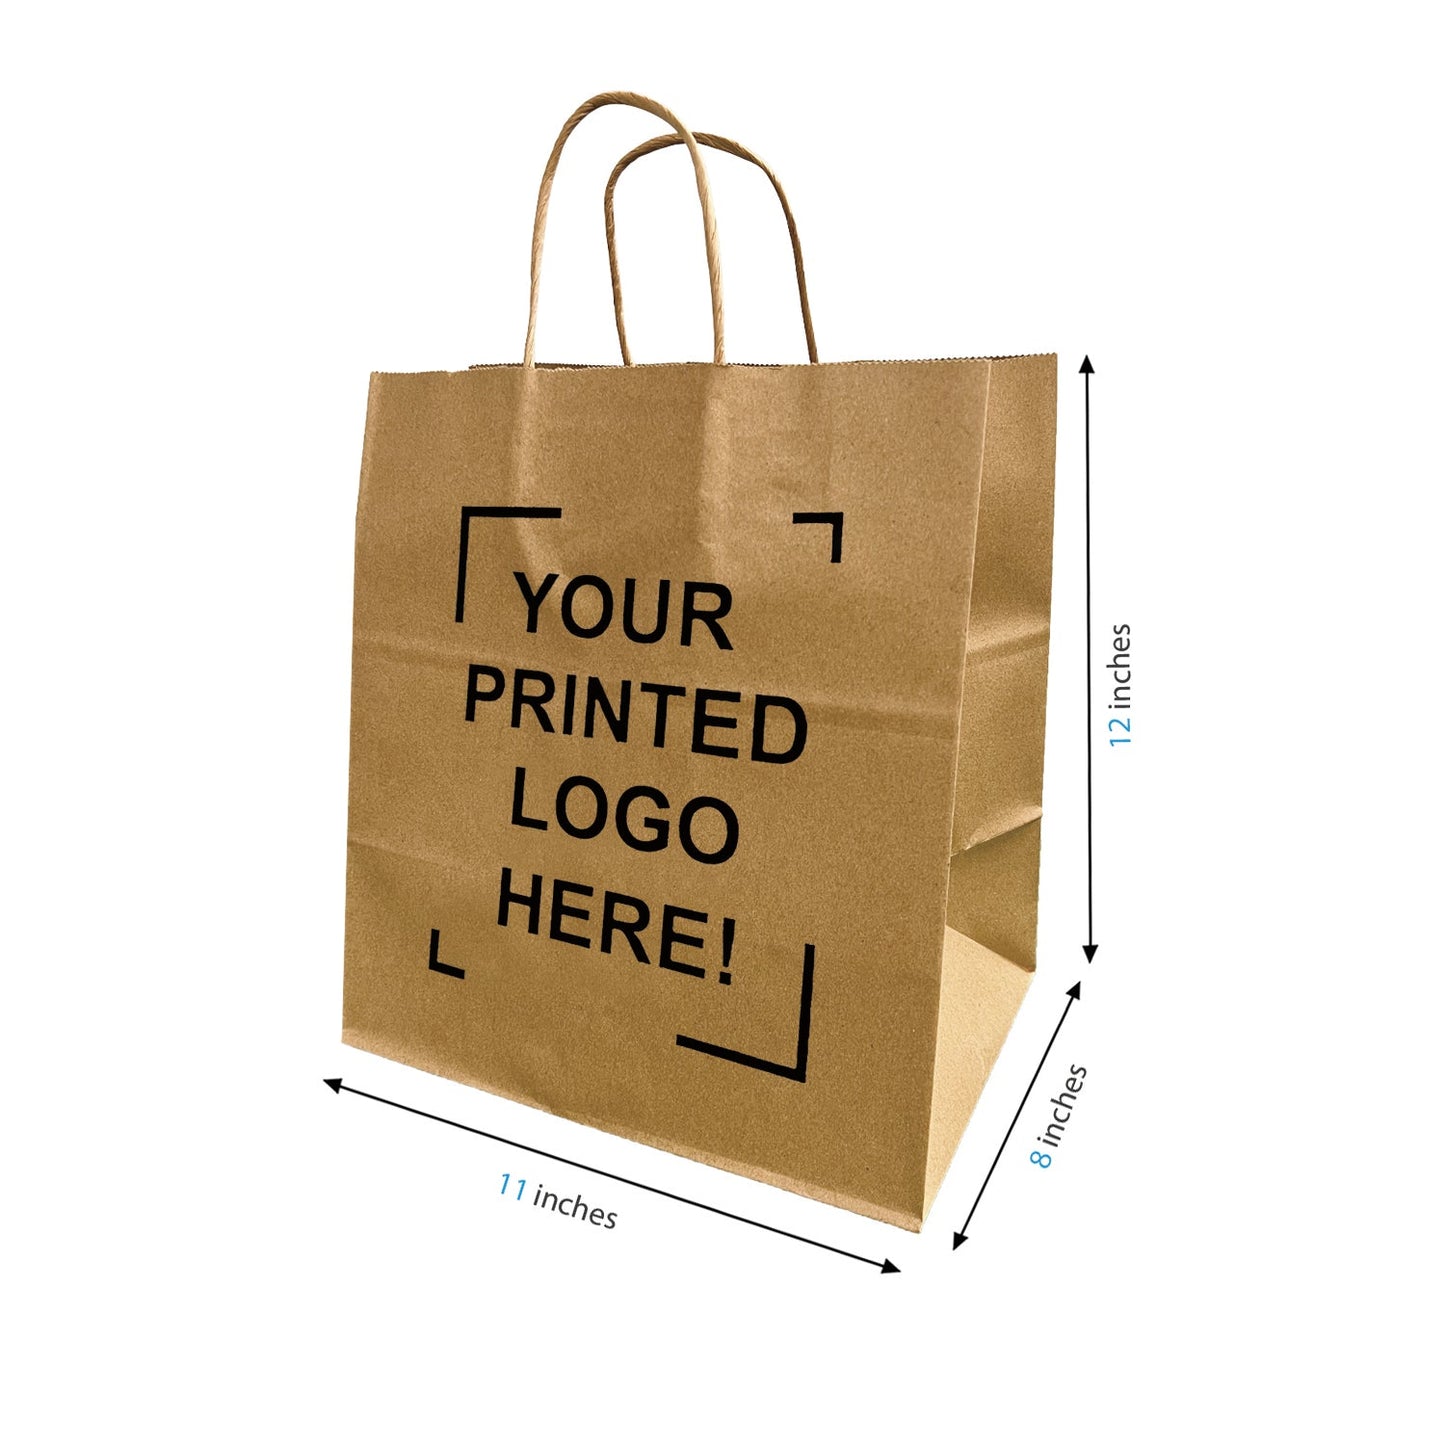 200pcs, Bento 11x8x12 inches Kraft Paper Bags Cardboard Insert Twisted Handles; Full Color Custom Print, Printed in Canada